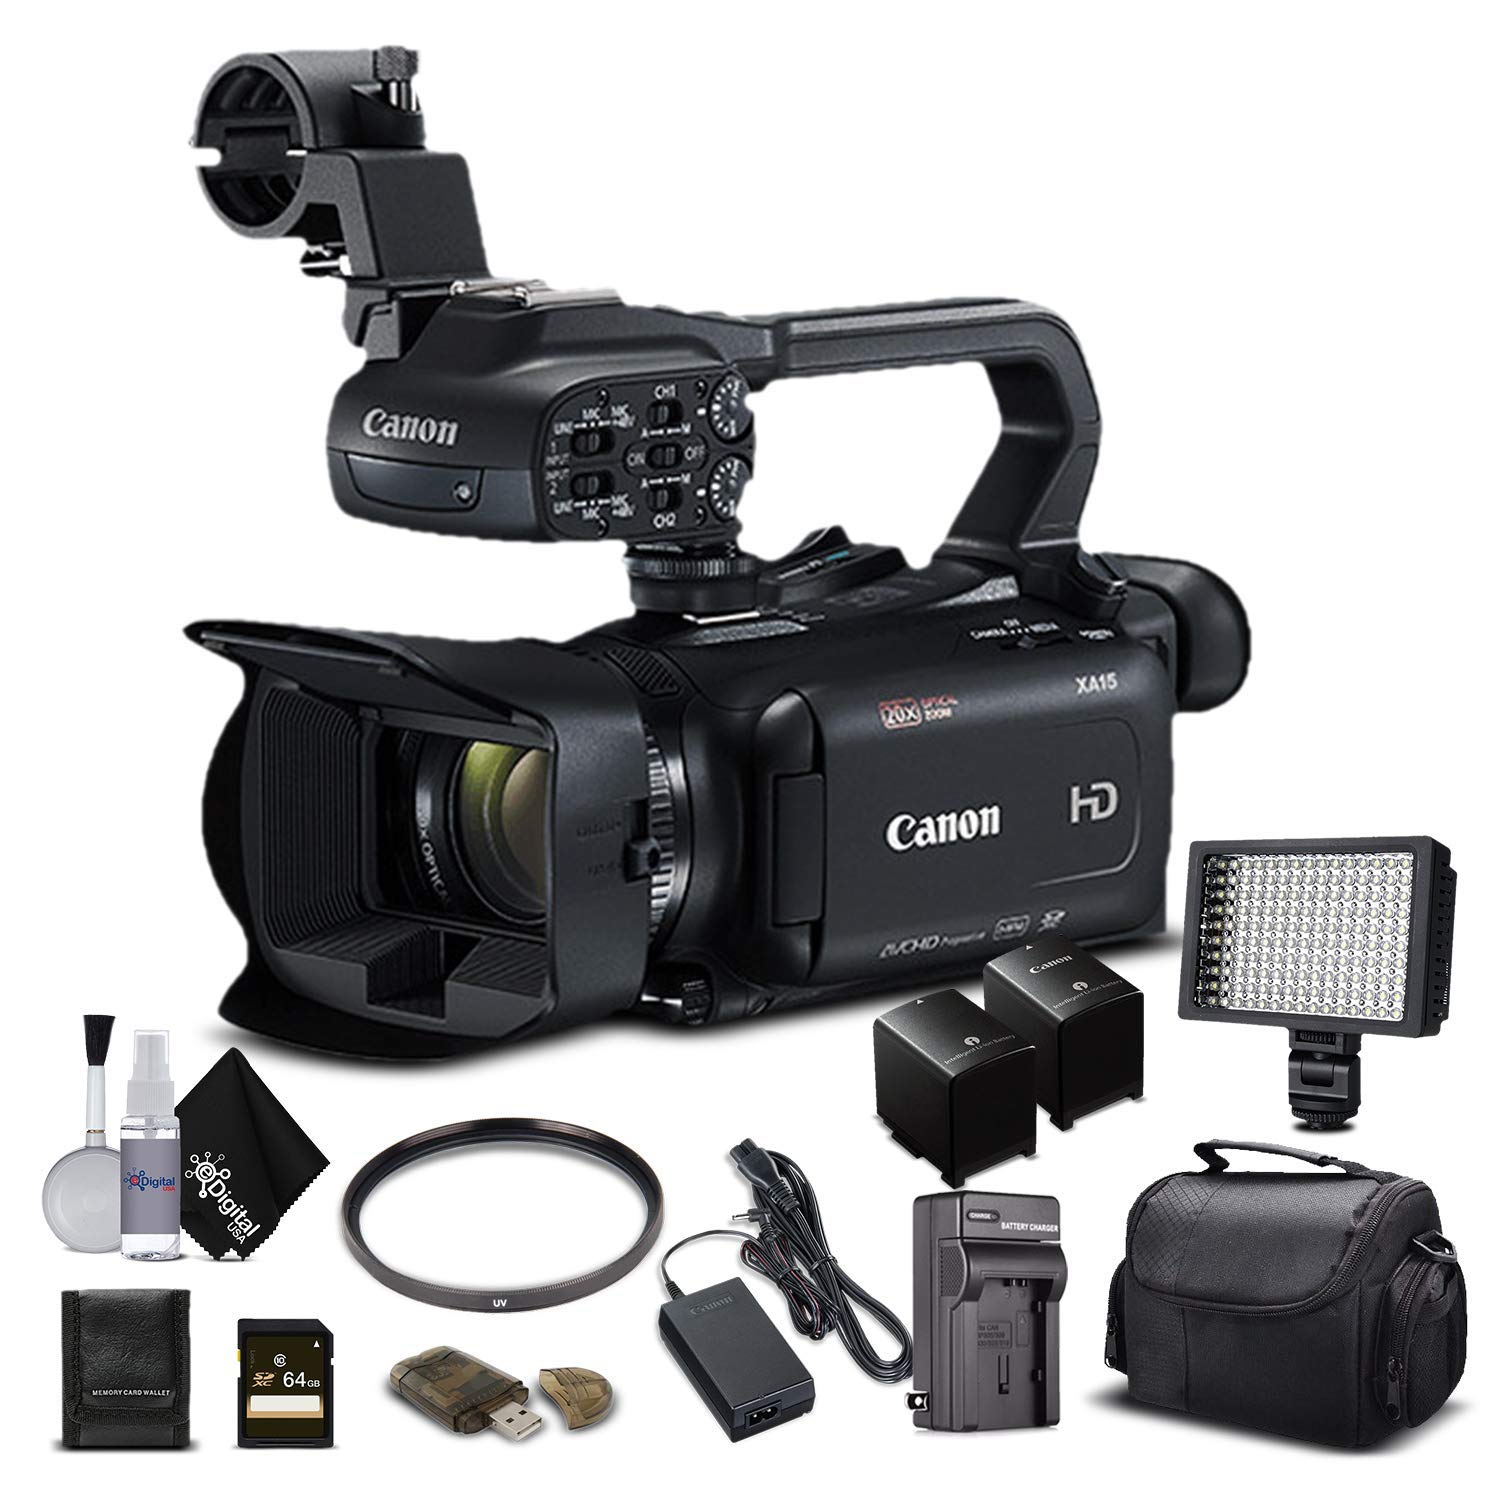 Canon XA15 Compact Full HD Camcorder 2217C002 with 64GB Memory Card, Extra Battery and Charger, UV Filter, LED Light, Ca